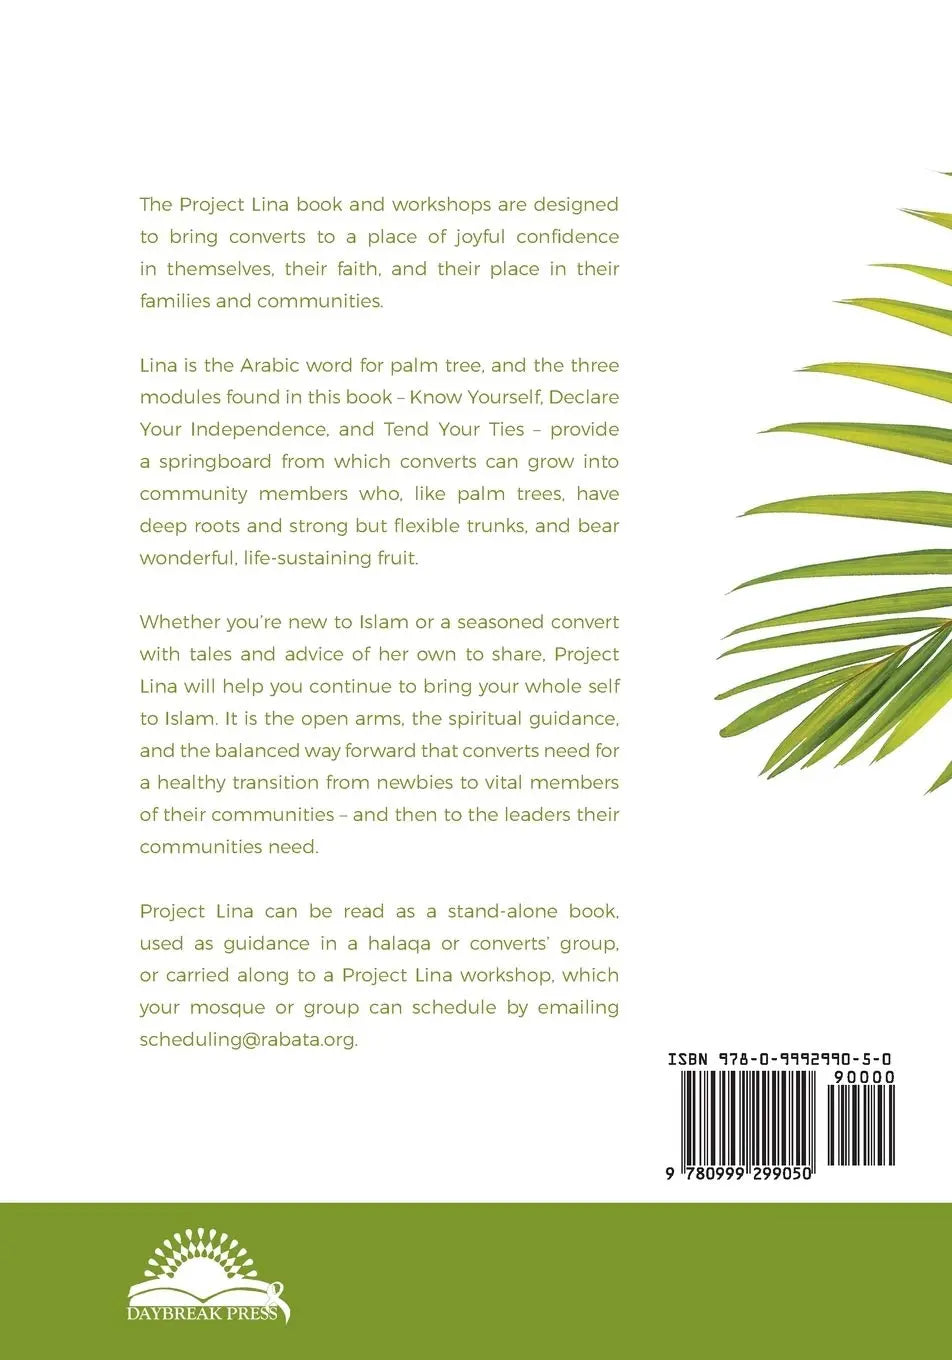 Project Lina: Bringing Our Whole Selves to Islam Daybreak Press